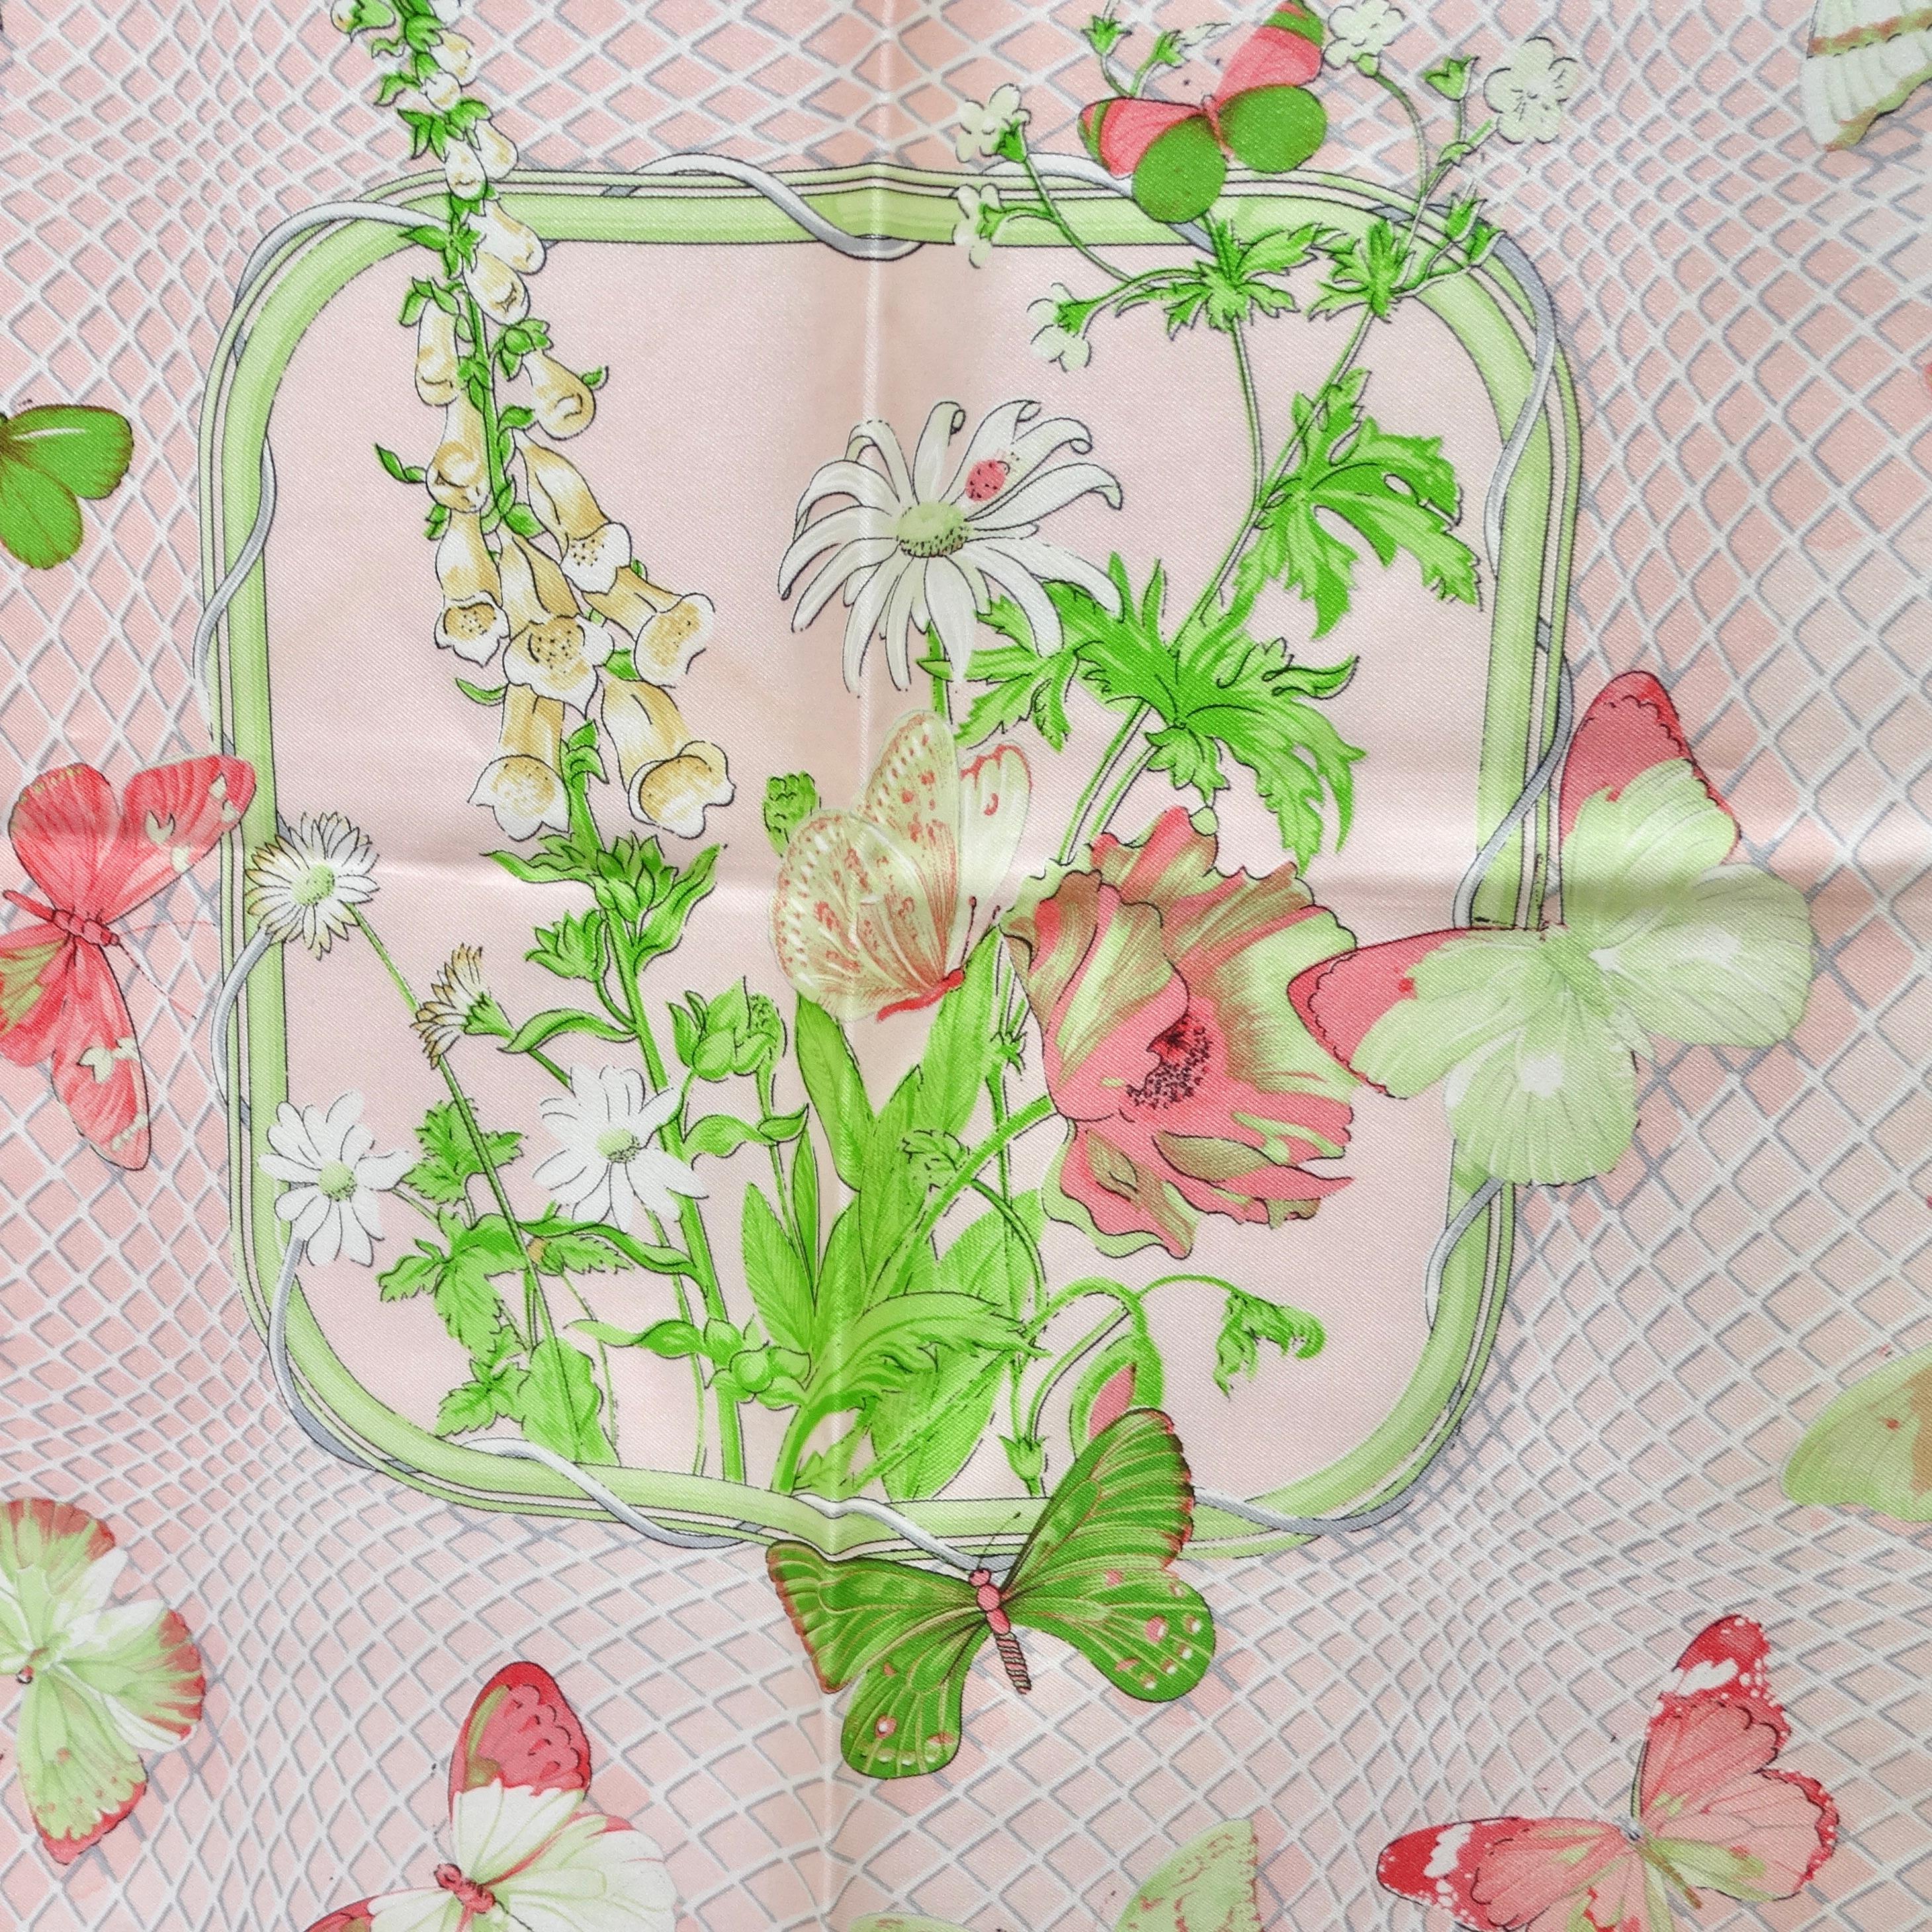 Elevate your ensemble with the timeless elegance of the Hermes Farandole Silk Scarf. Crafted from luxurious silk, this signature Hermes scarf showcases the iconic 'Farandole' print, featuring exquisite light pink and green butterflies and flowers